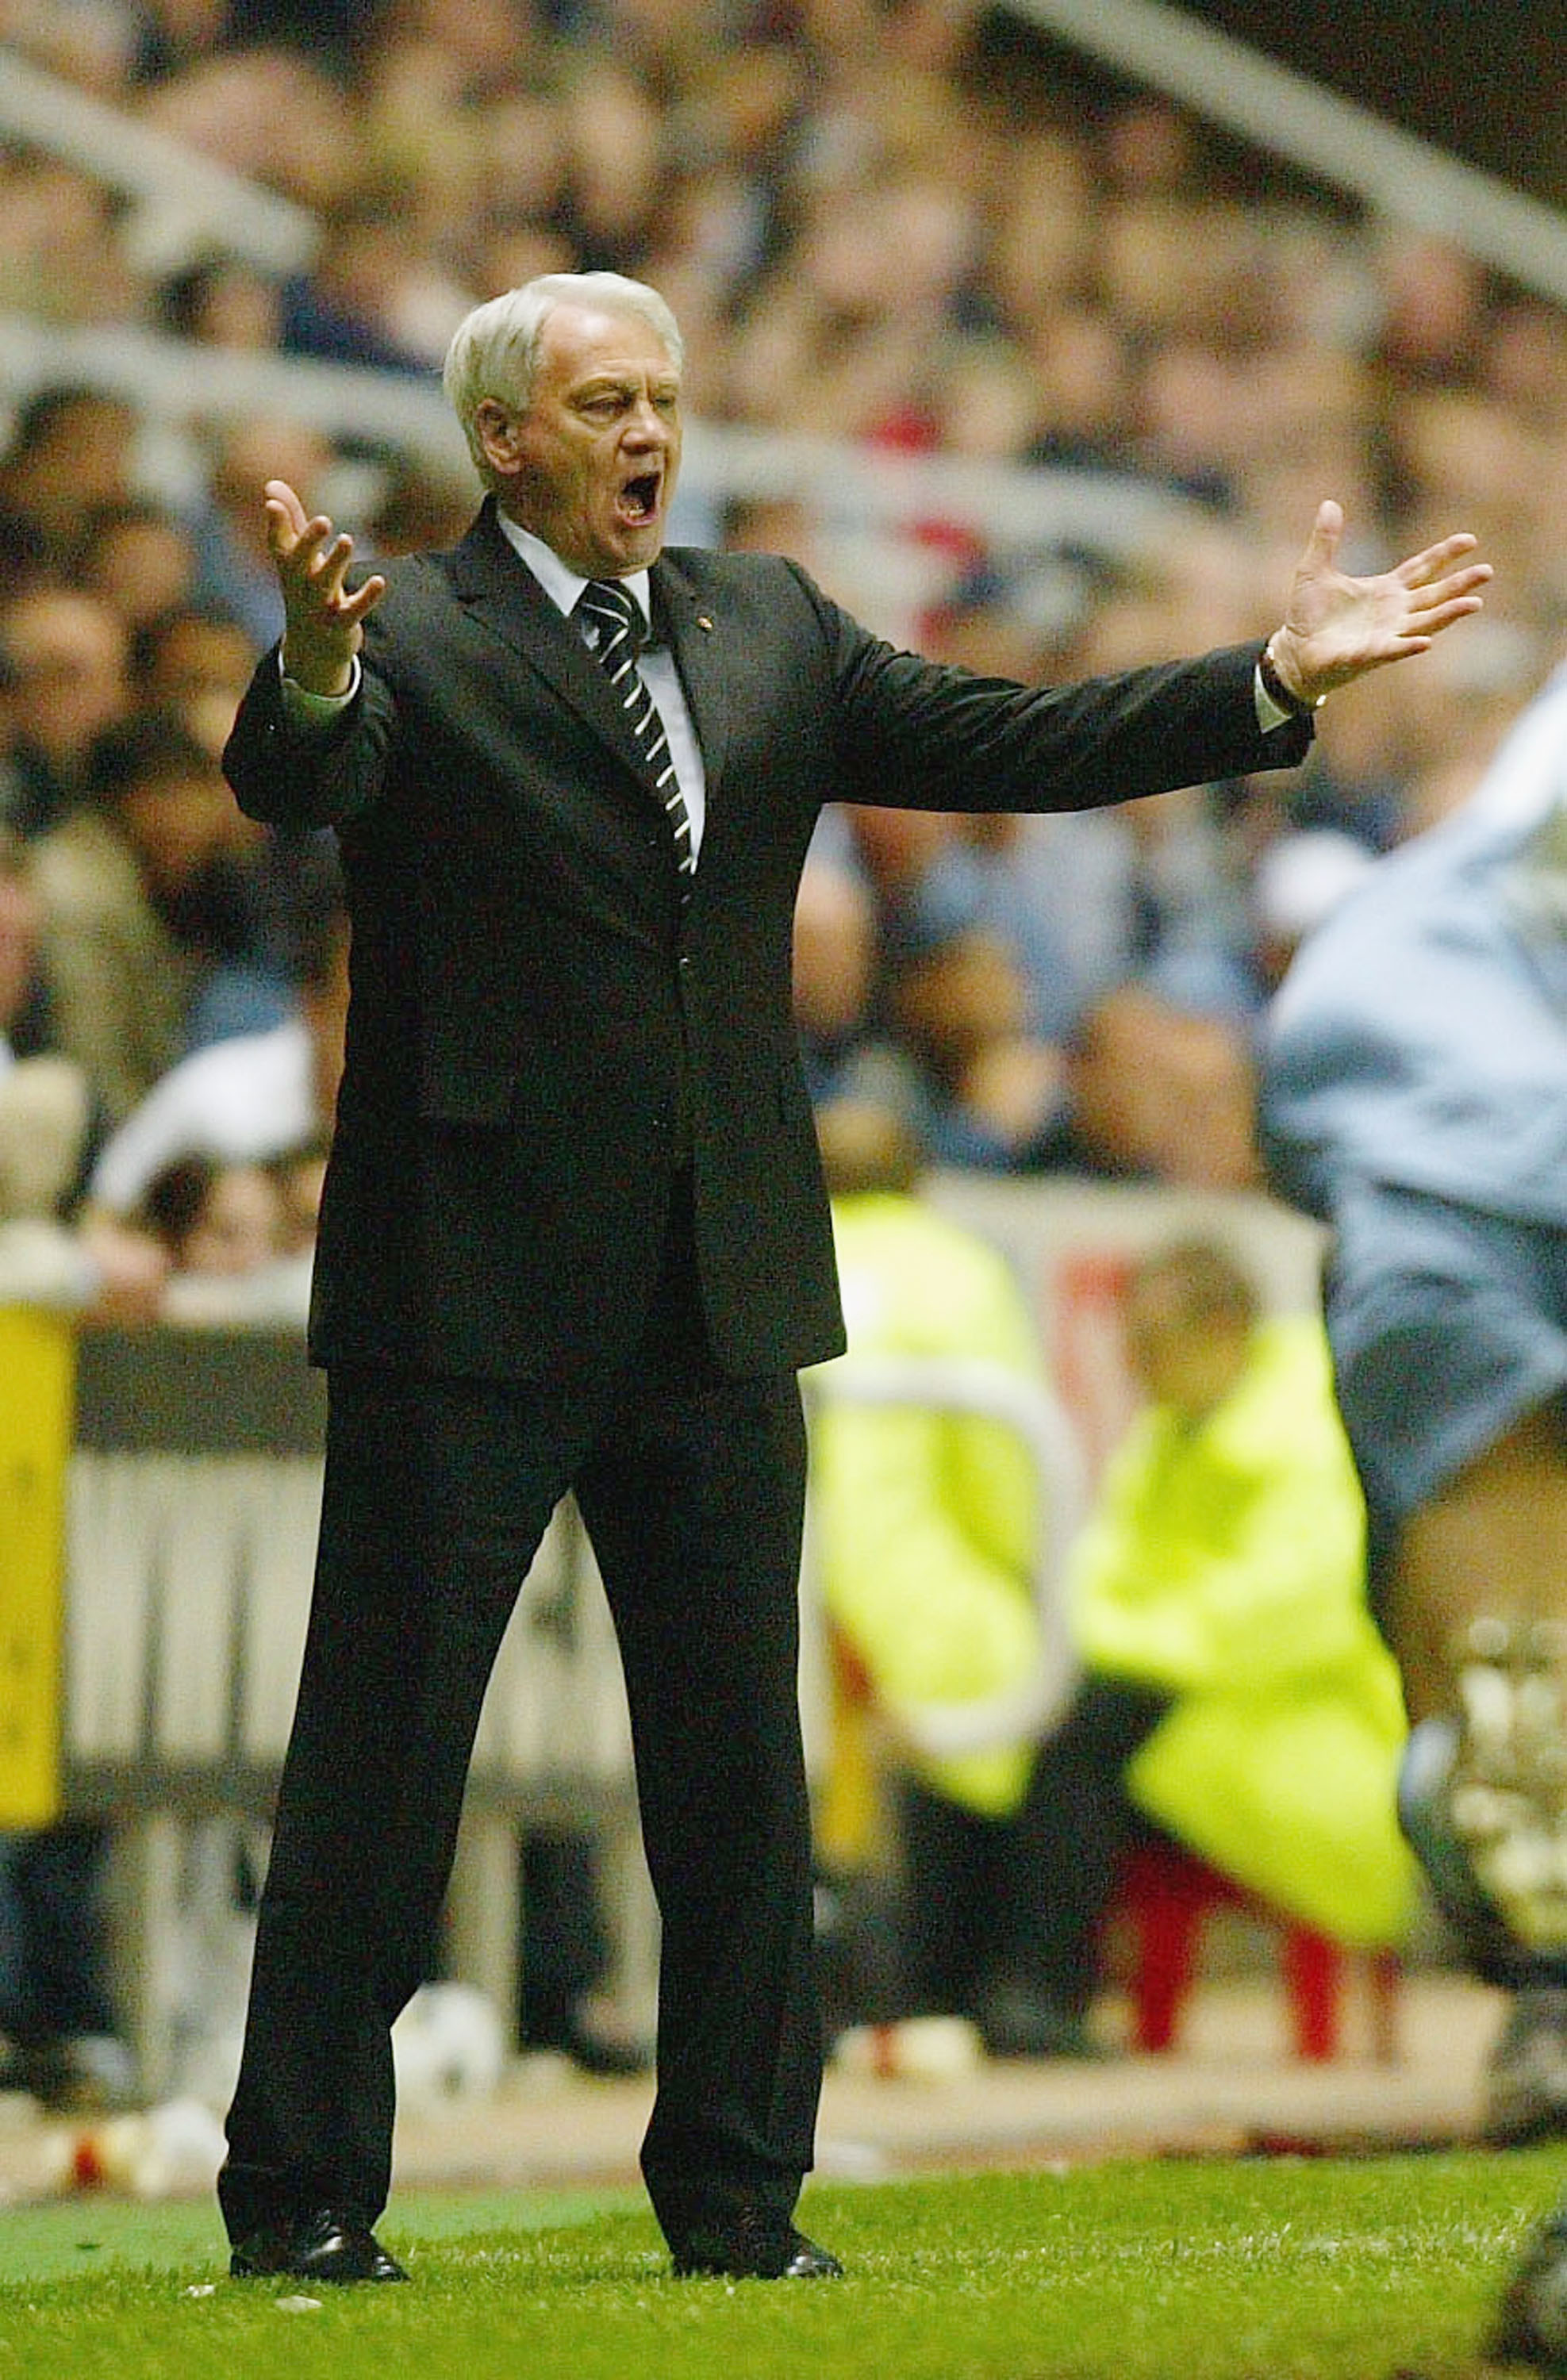 NEWCASTLE, ENGLAND - APRIL 22:  A frustrated manager Bobby Robson of Newcastle during the UEFA Cup Semi Final First Leg match between Newcastle United and Marseille at St. James Park on April 22, 2004 in Newcastle, England.  (Photo by Ross Kinnaird/Getty